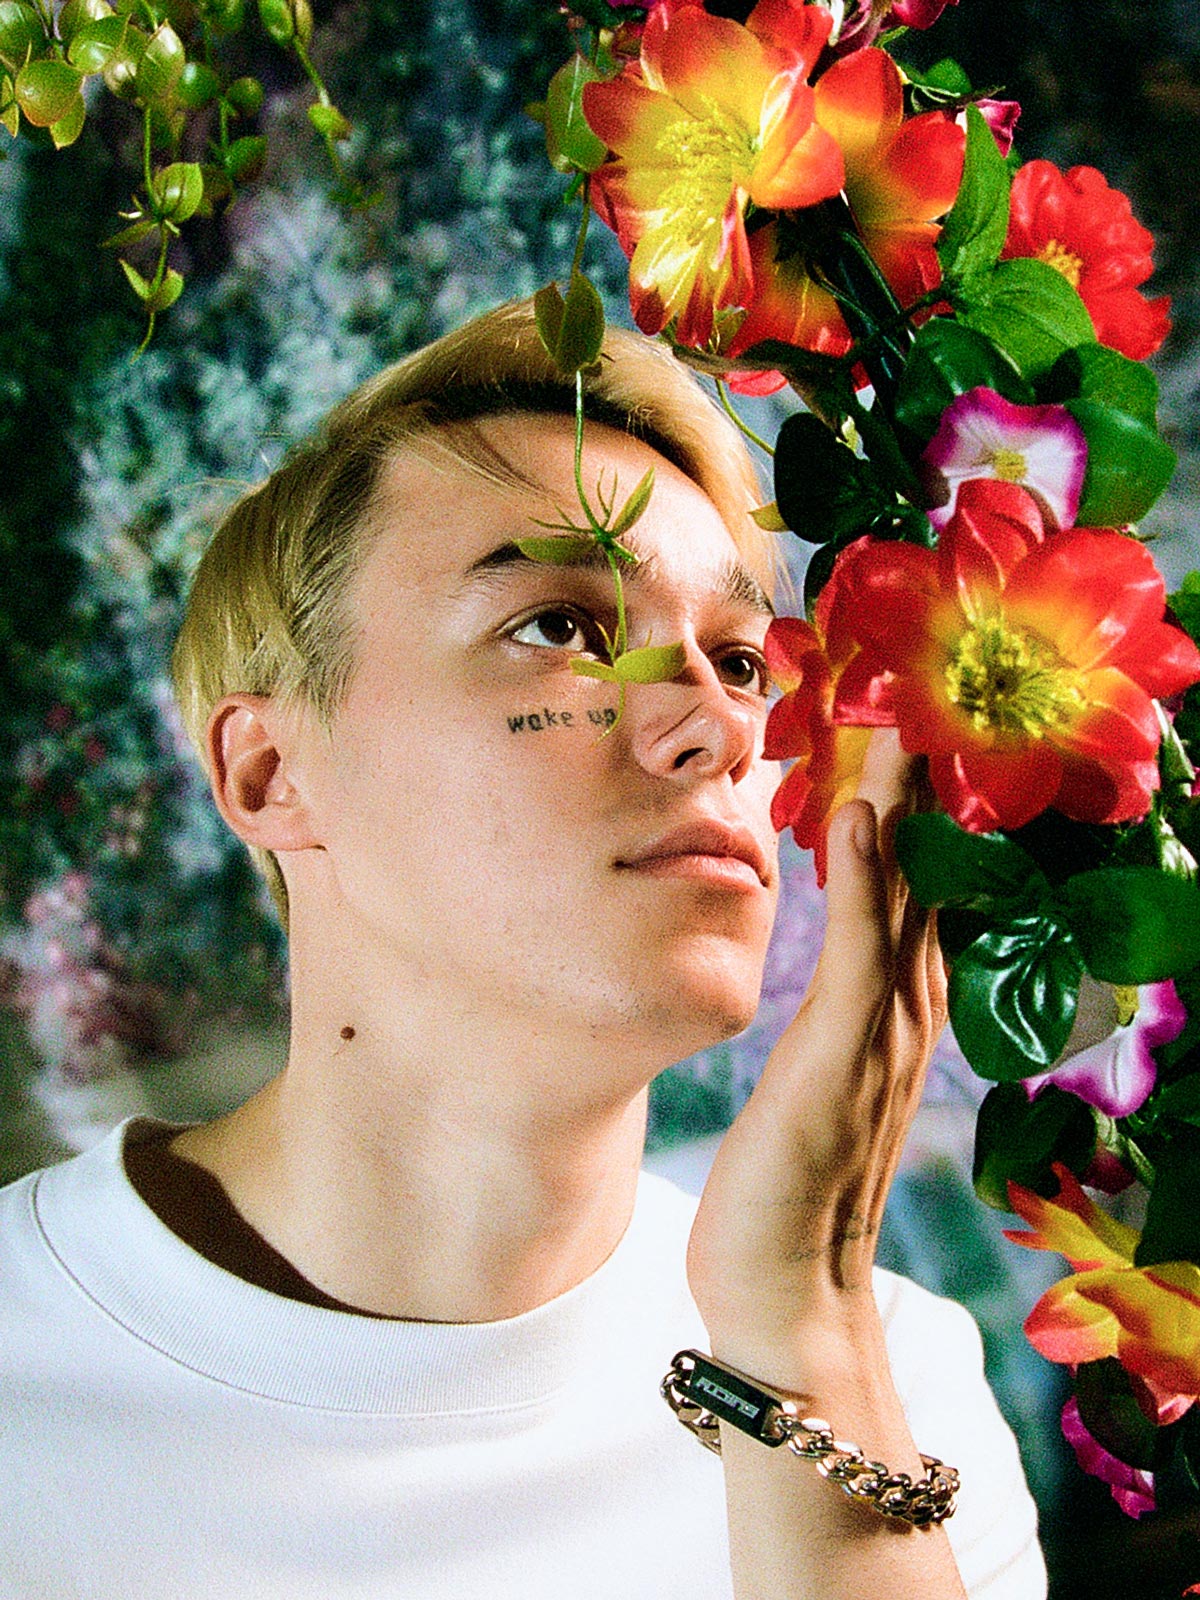 <p>Nick Gavrilov is known for his edgy portraiture which perfectly reflects the current wave of Russia’s youth culture. This one of Sasha Trautvein, one of the most hyped Russian faces on the international modelling scene, plays with 1980s technicolour aesthetics and classic composition. </p>